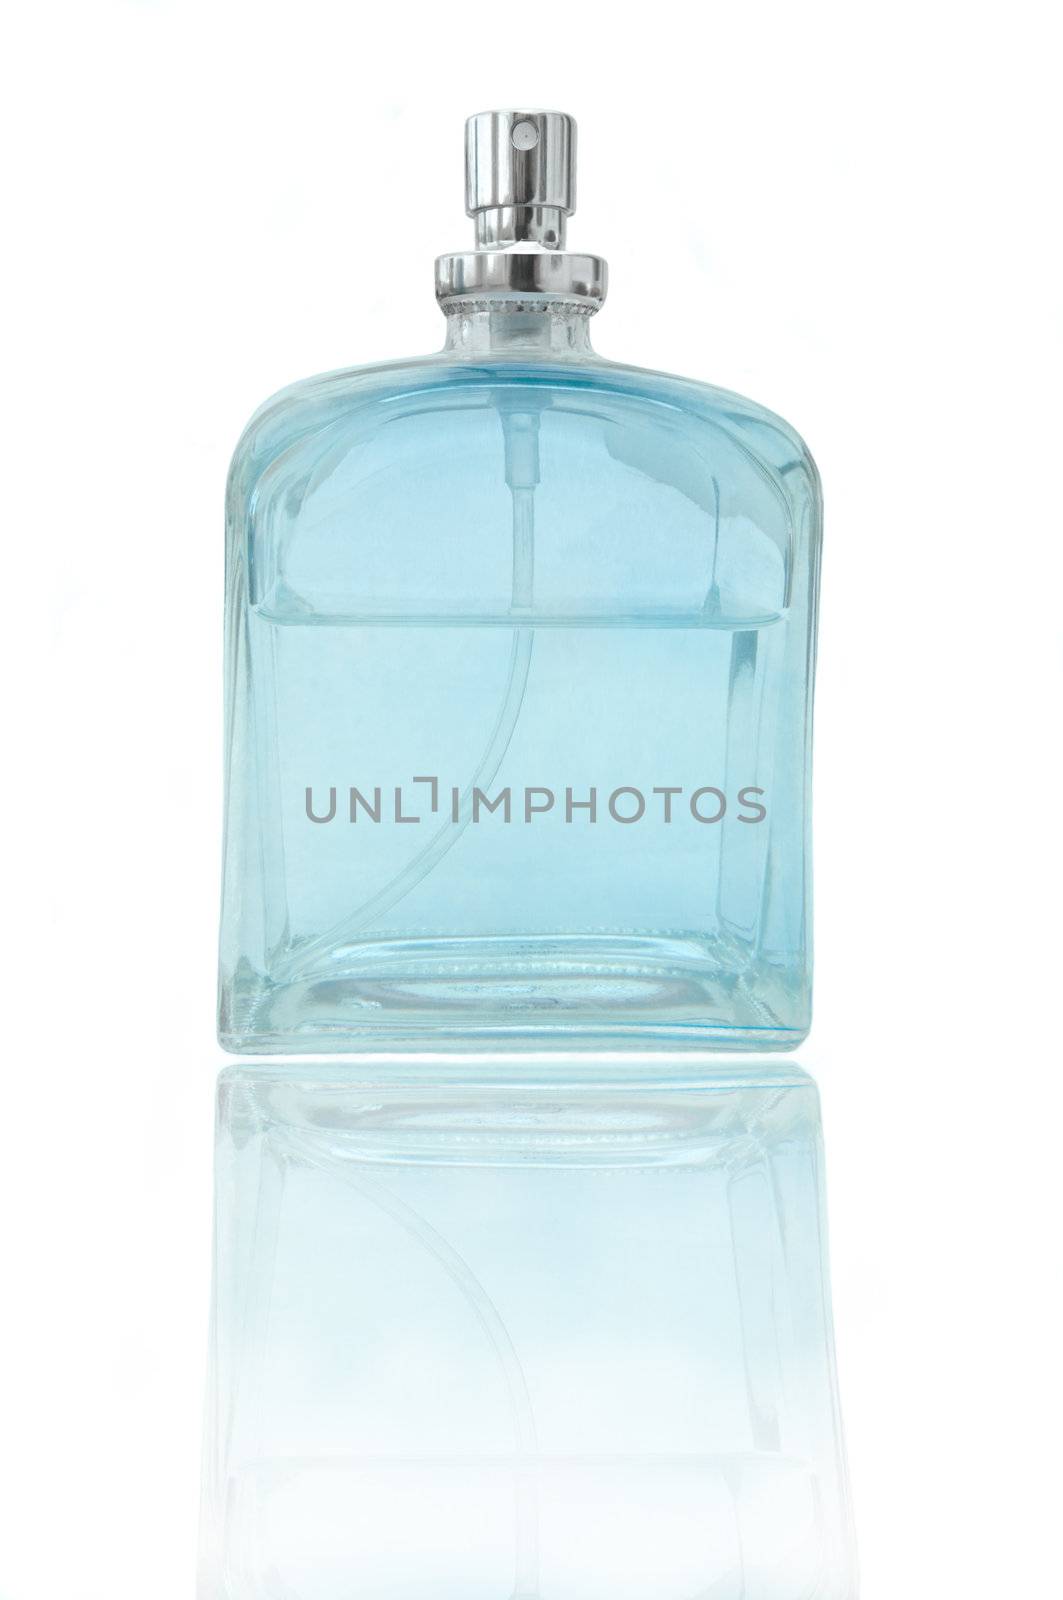 A single glass blue perfume bottle arranged over white and reflecting into the foreground.